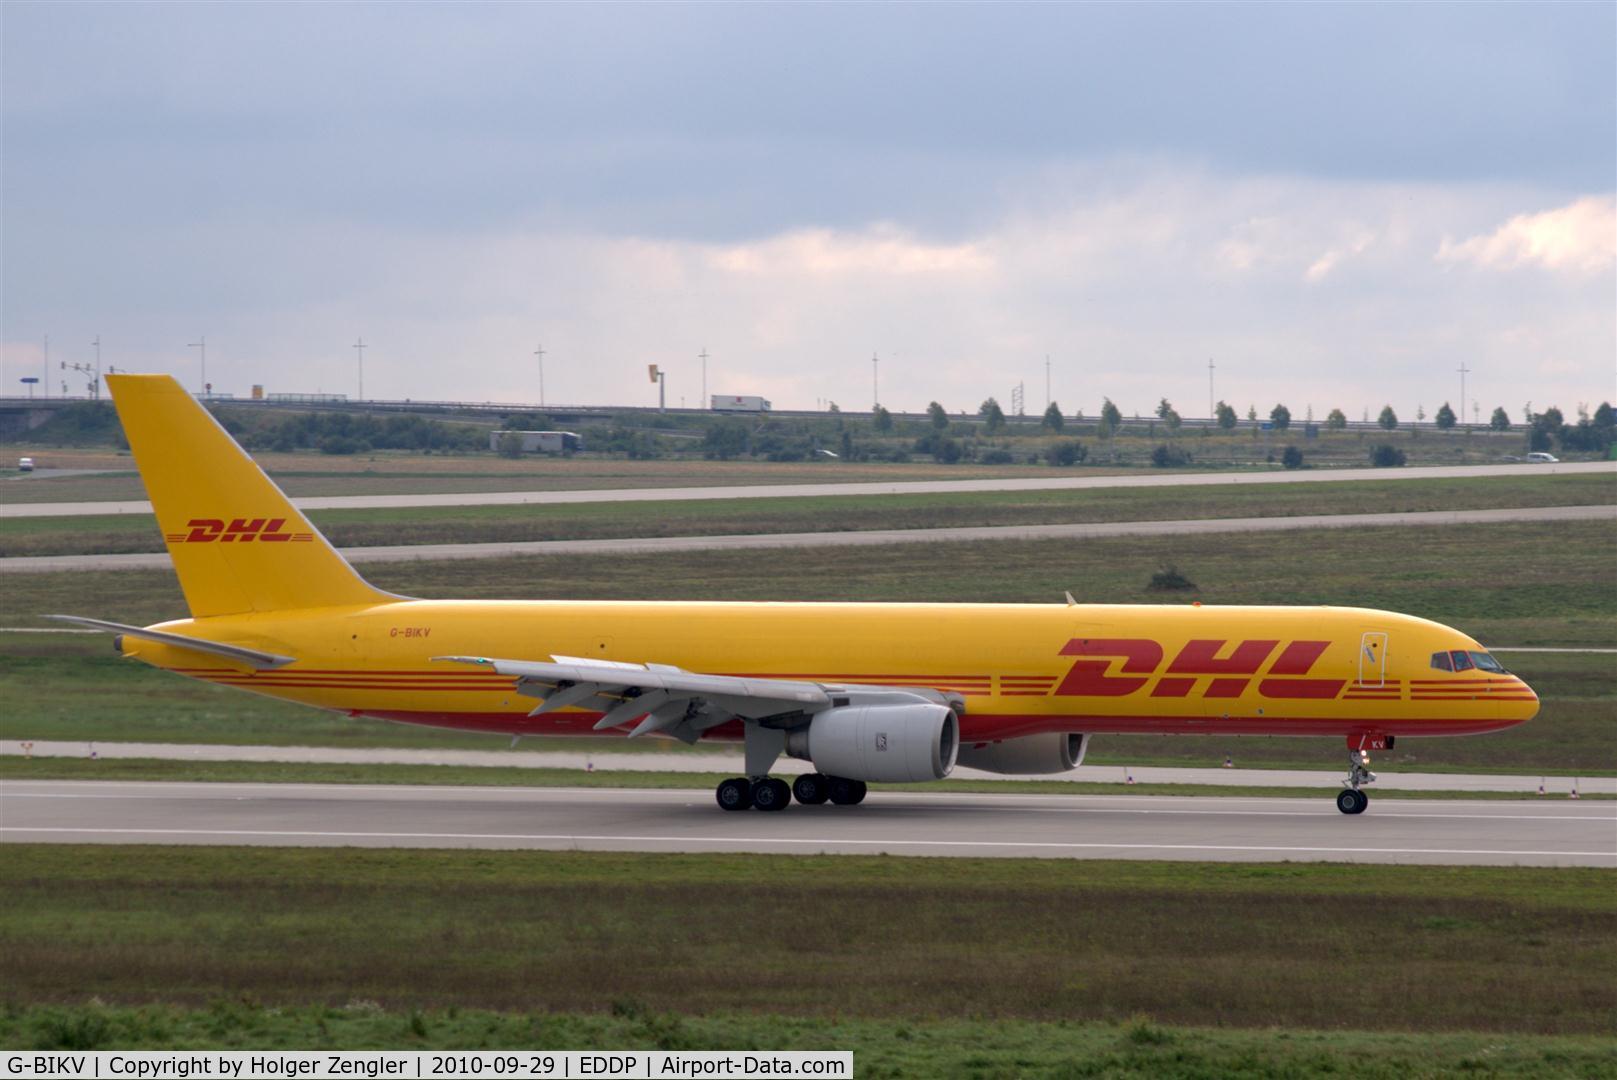 G-BIKV, 1985 Boeing 757-236 C/N 23400, Rather early arrival of a DHL-Liner.